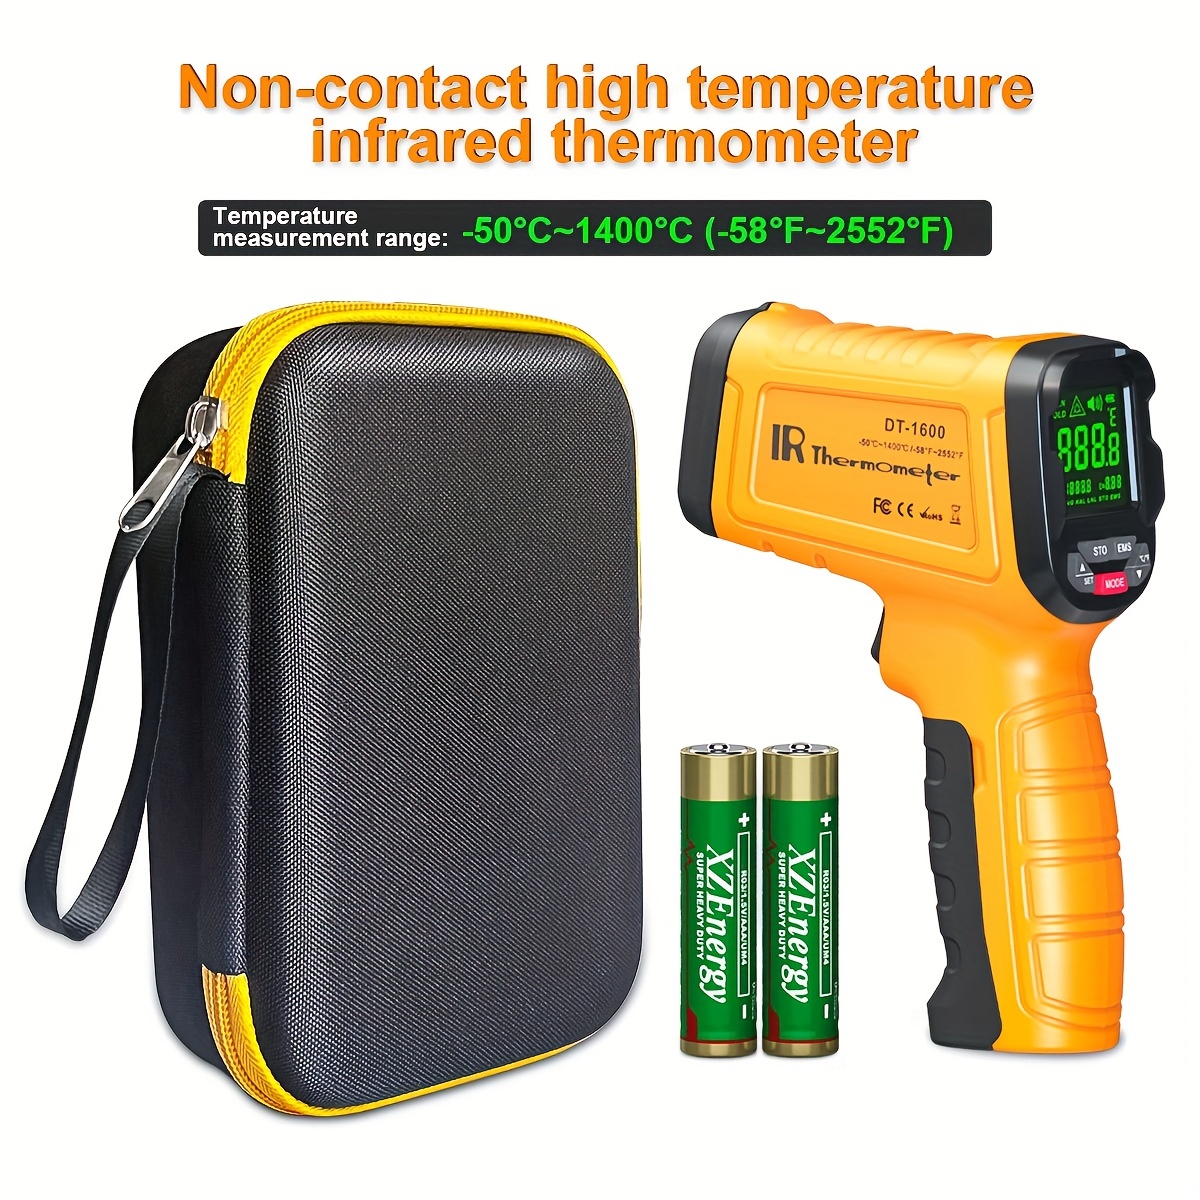 Njty Infrared Thermometer Non- Digital Temperature -50c~600c (-58f~1112f) IR Thermometer for Industrial, Kitchen Cooking, Automotive, Not for Human